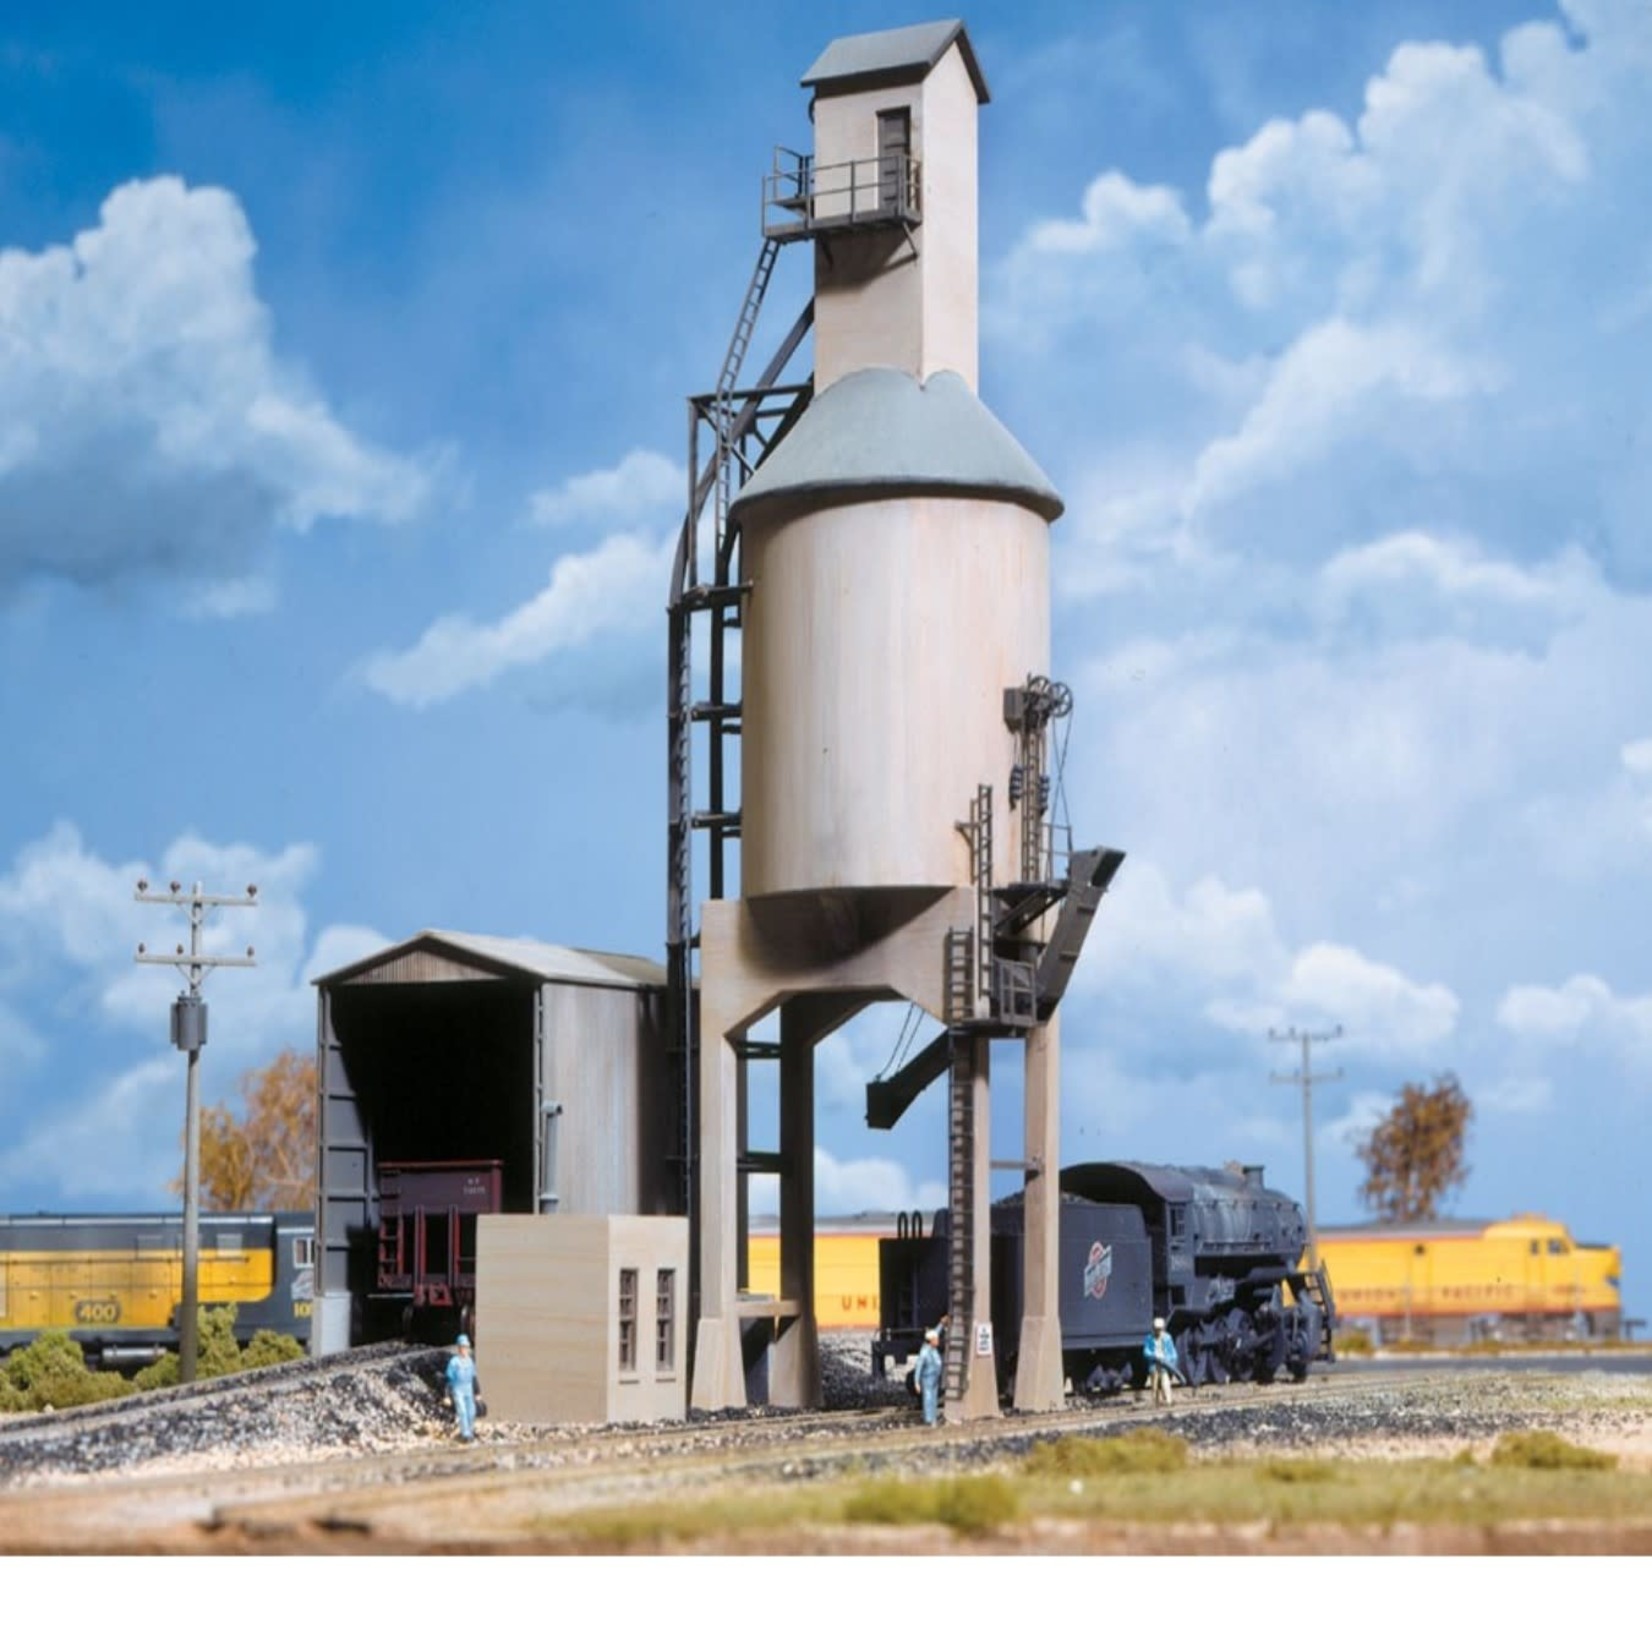 Walthers Cornerstone HO Concrete Coaling Tower Kit - Clearance